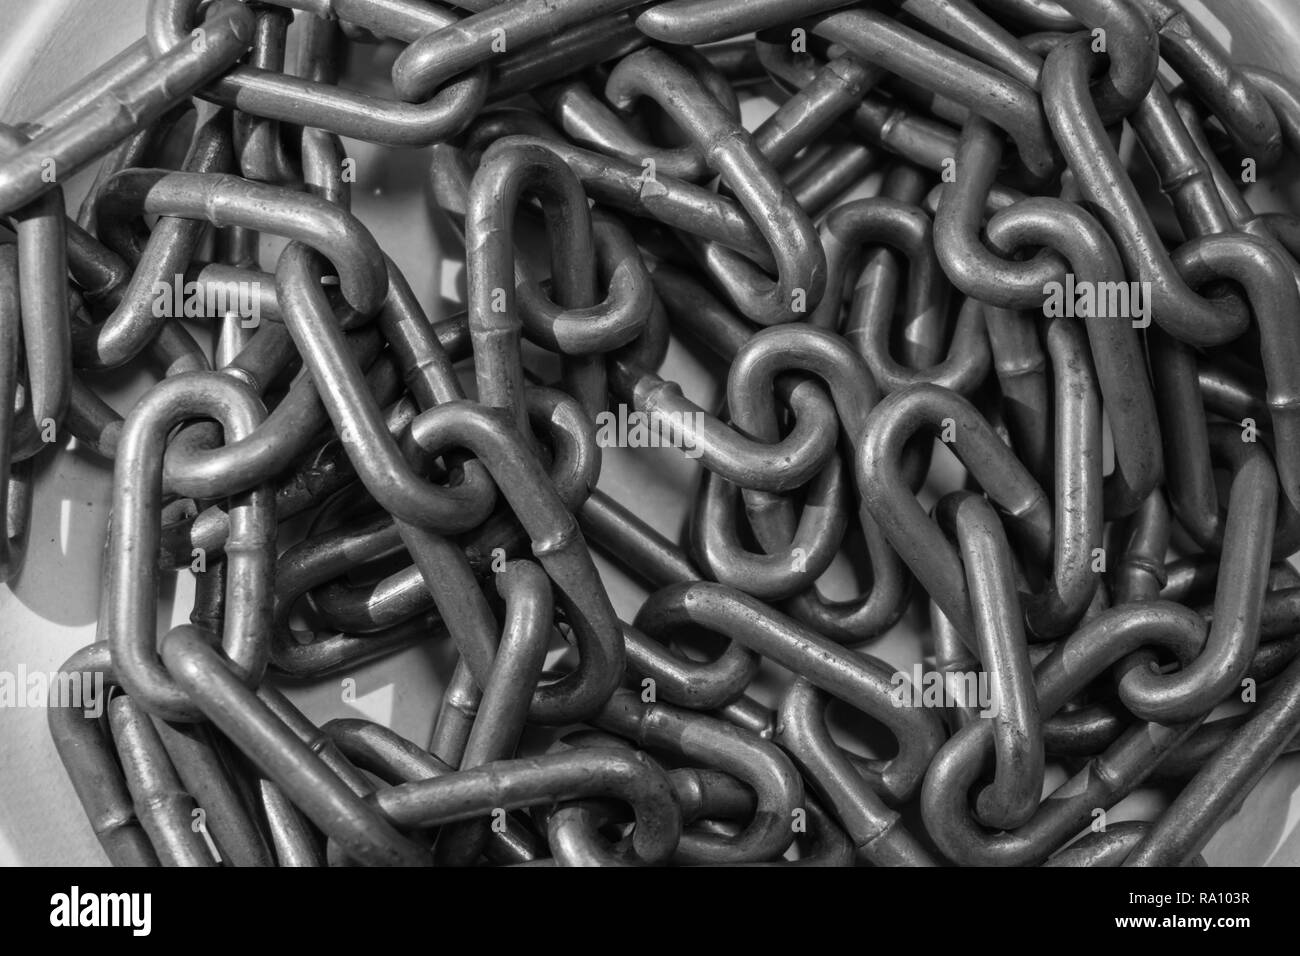 Close-up gray chain background. Photo of metallic chain on background. Stock Photo